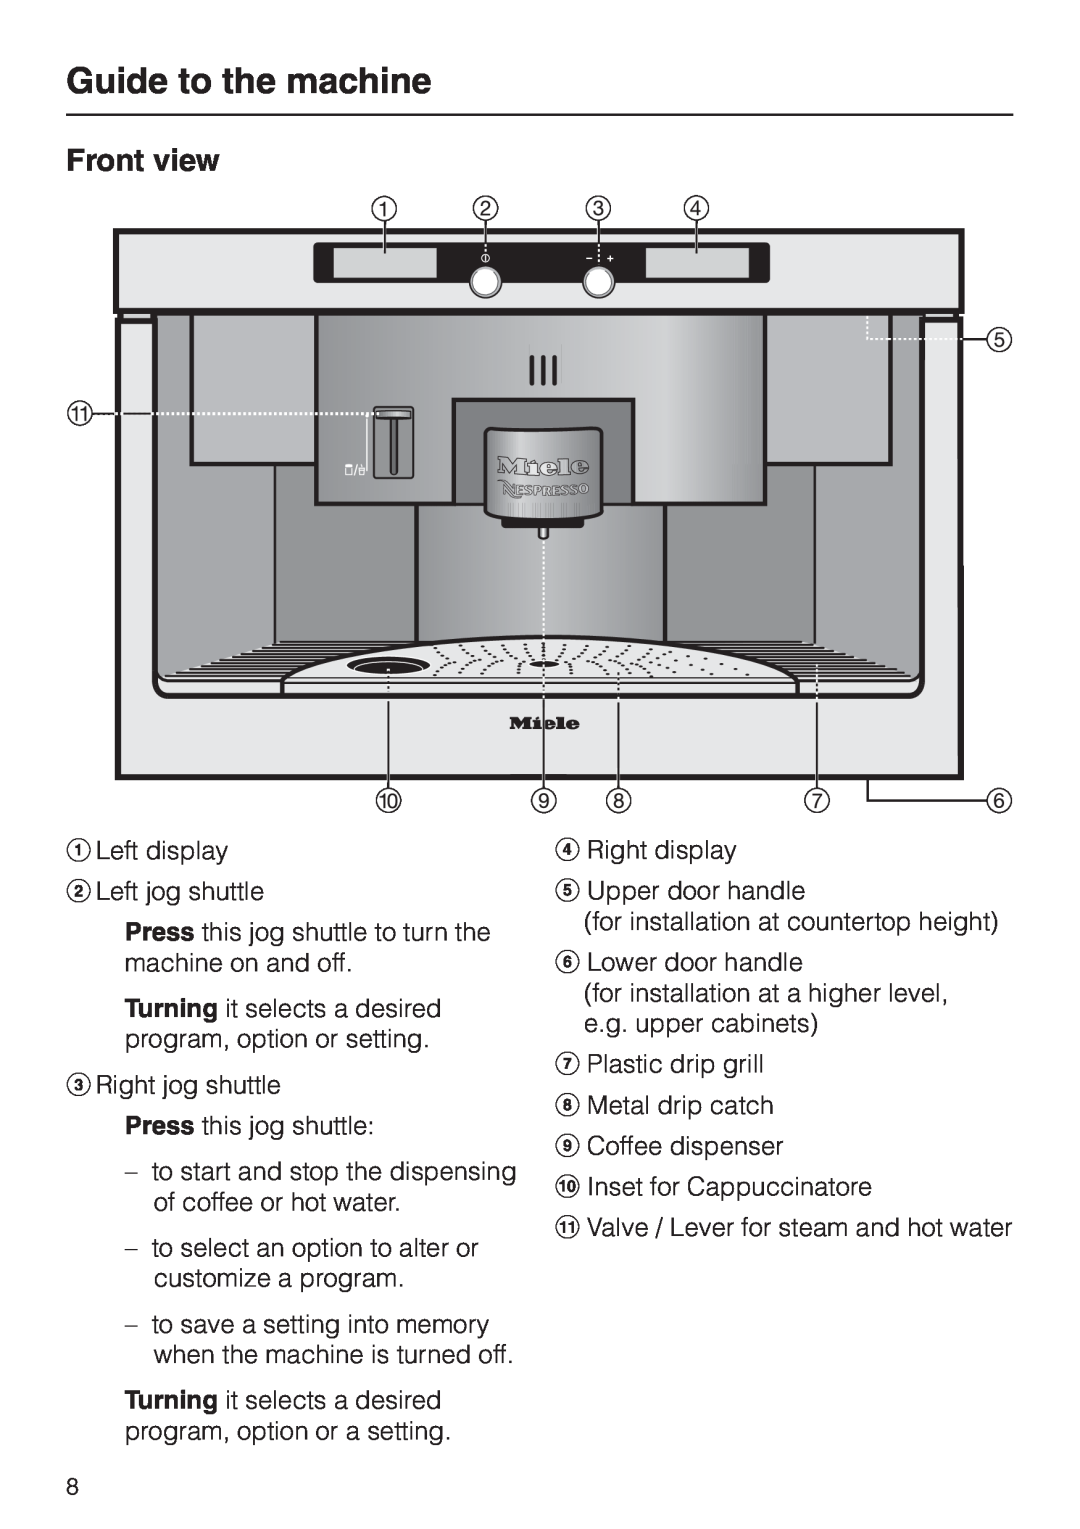 Miele CVA 2650 operating instructions Guide to the machine, Front view 